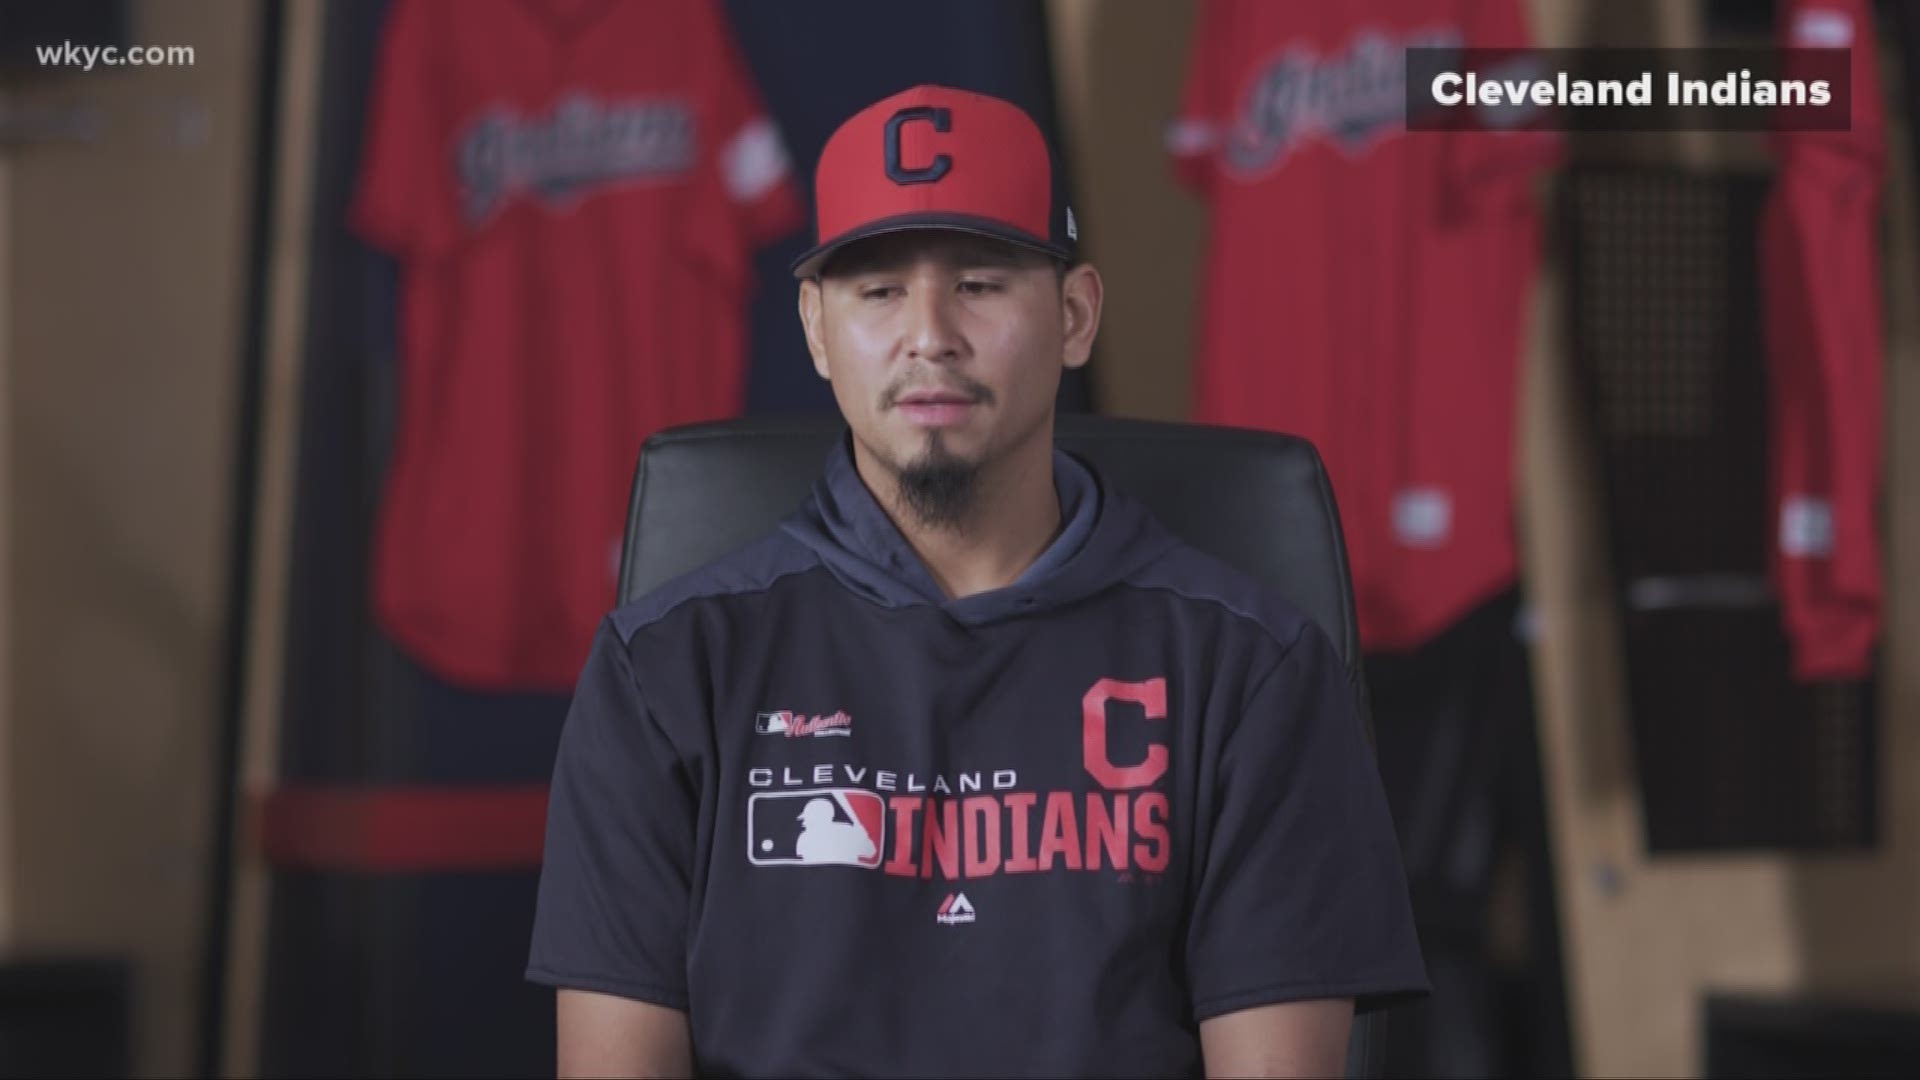 Cleveland Indians starting pitcher Carlos Carrasco revealed to a Dominican Republic news station that he has been battling leukemia since last month.